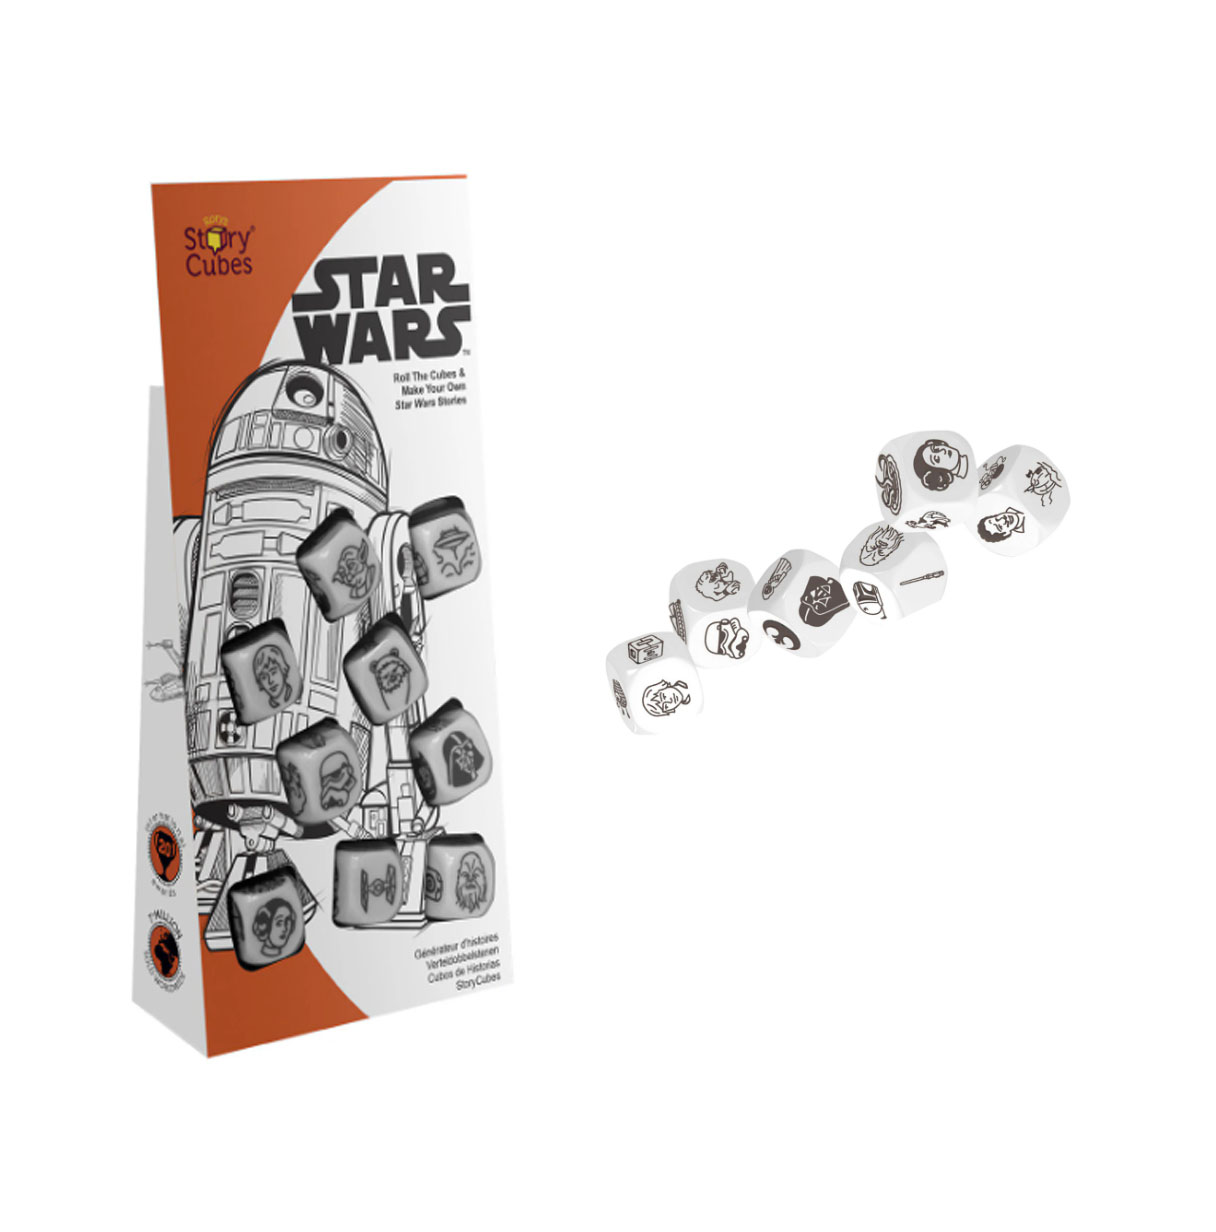 story cubes star wars     (asmodee - swsc2)